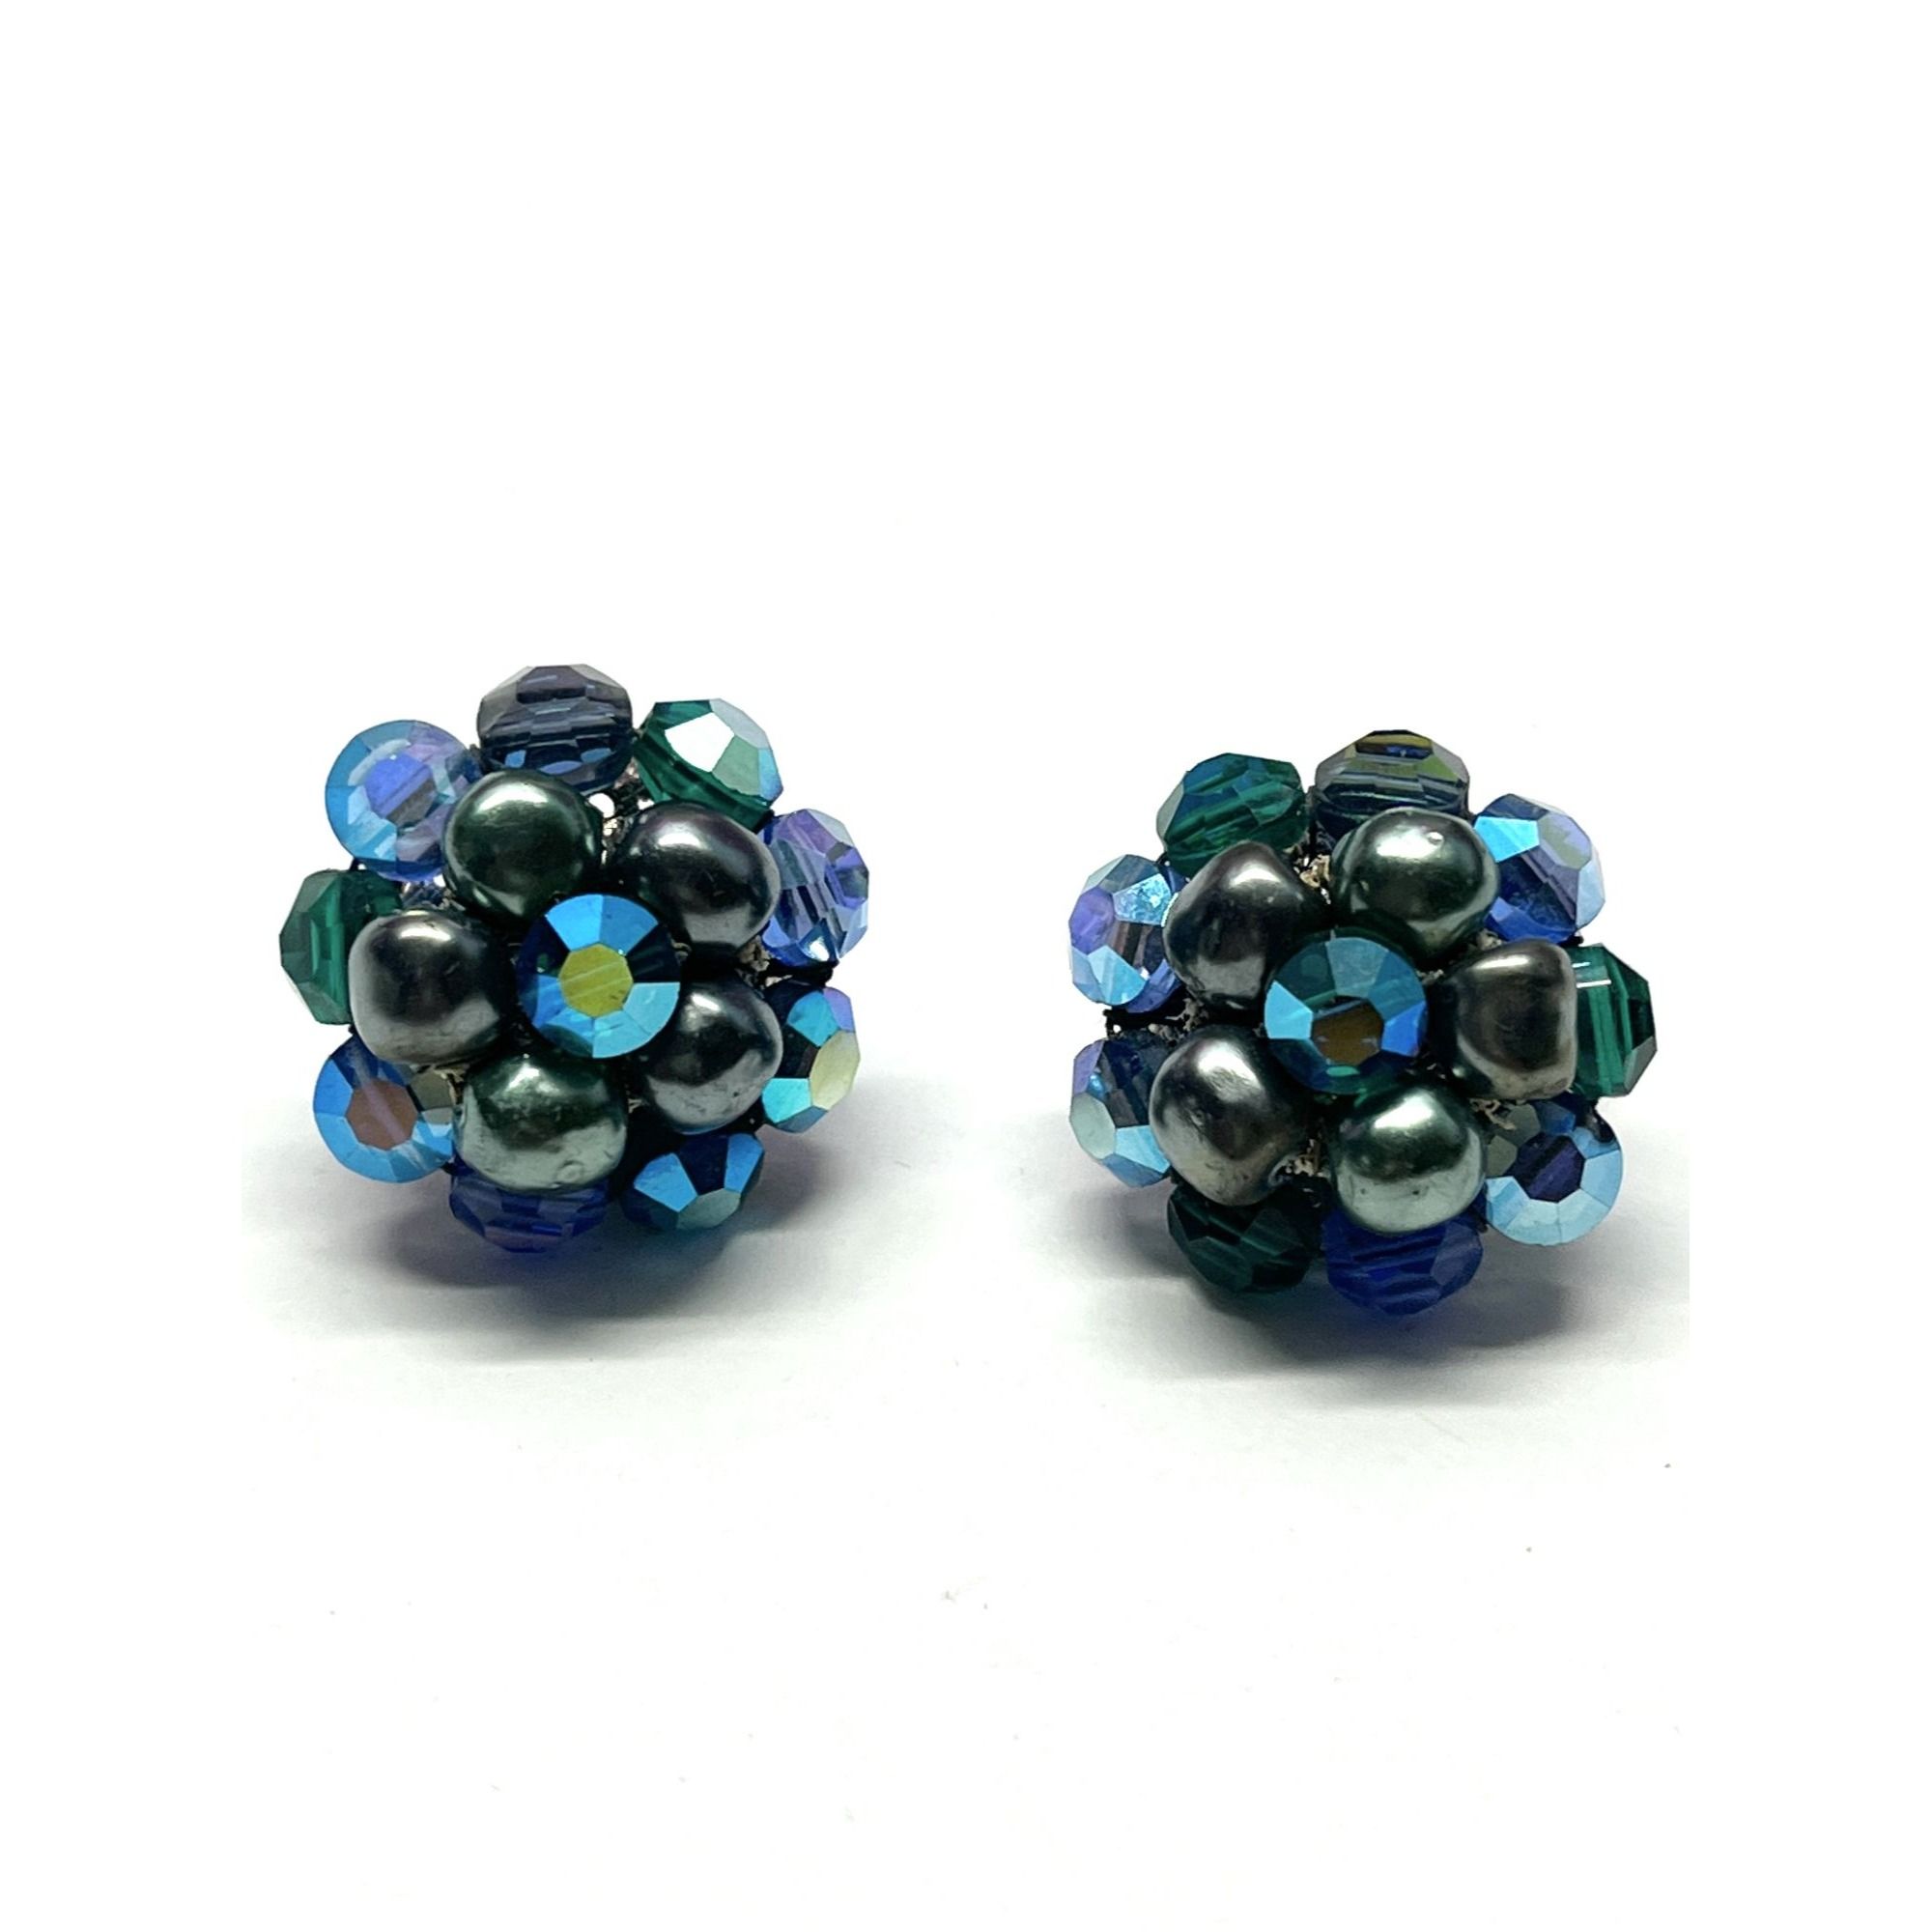 Vogue Vintage Vogue Blue Crystal Cluster Earrings Size ONE SIZE - 2 Preview